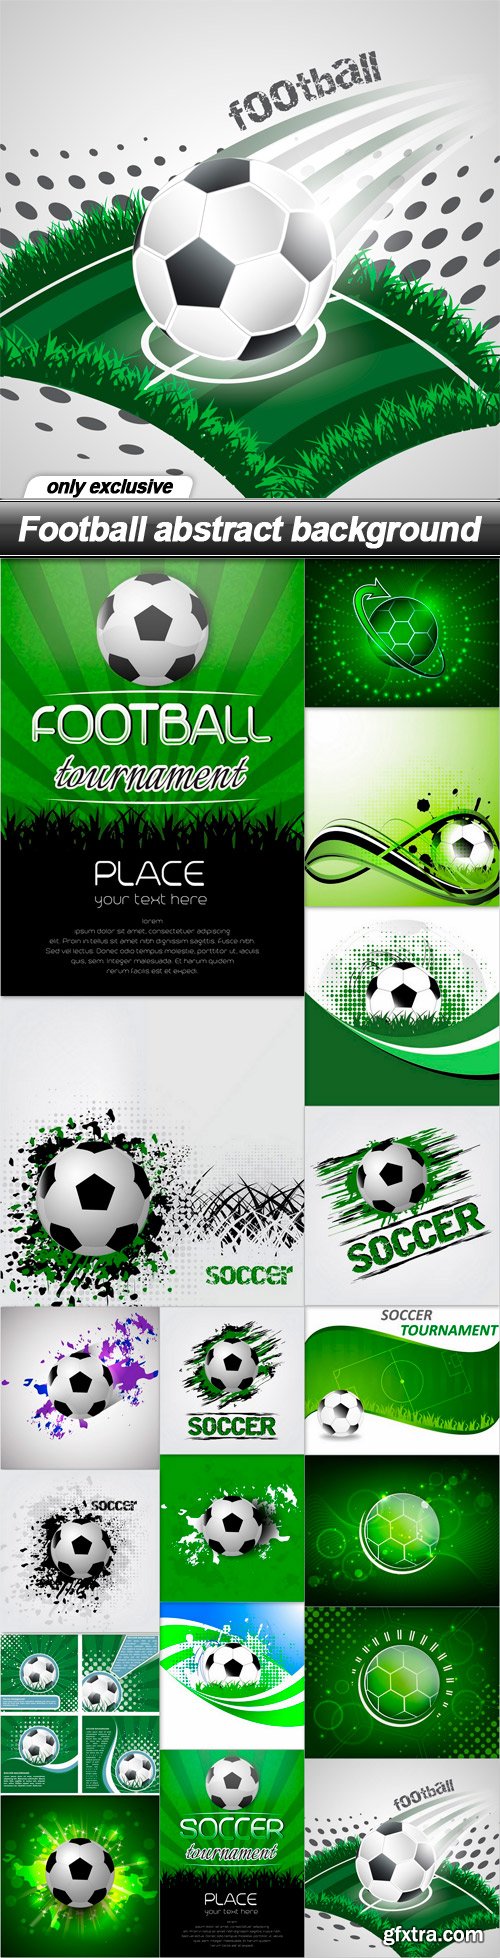 Football abstract background - 18 EPS